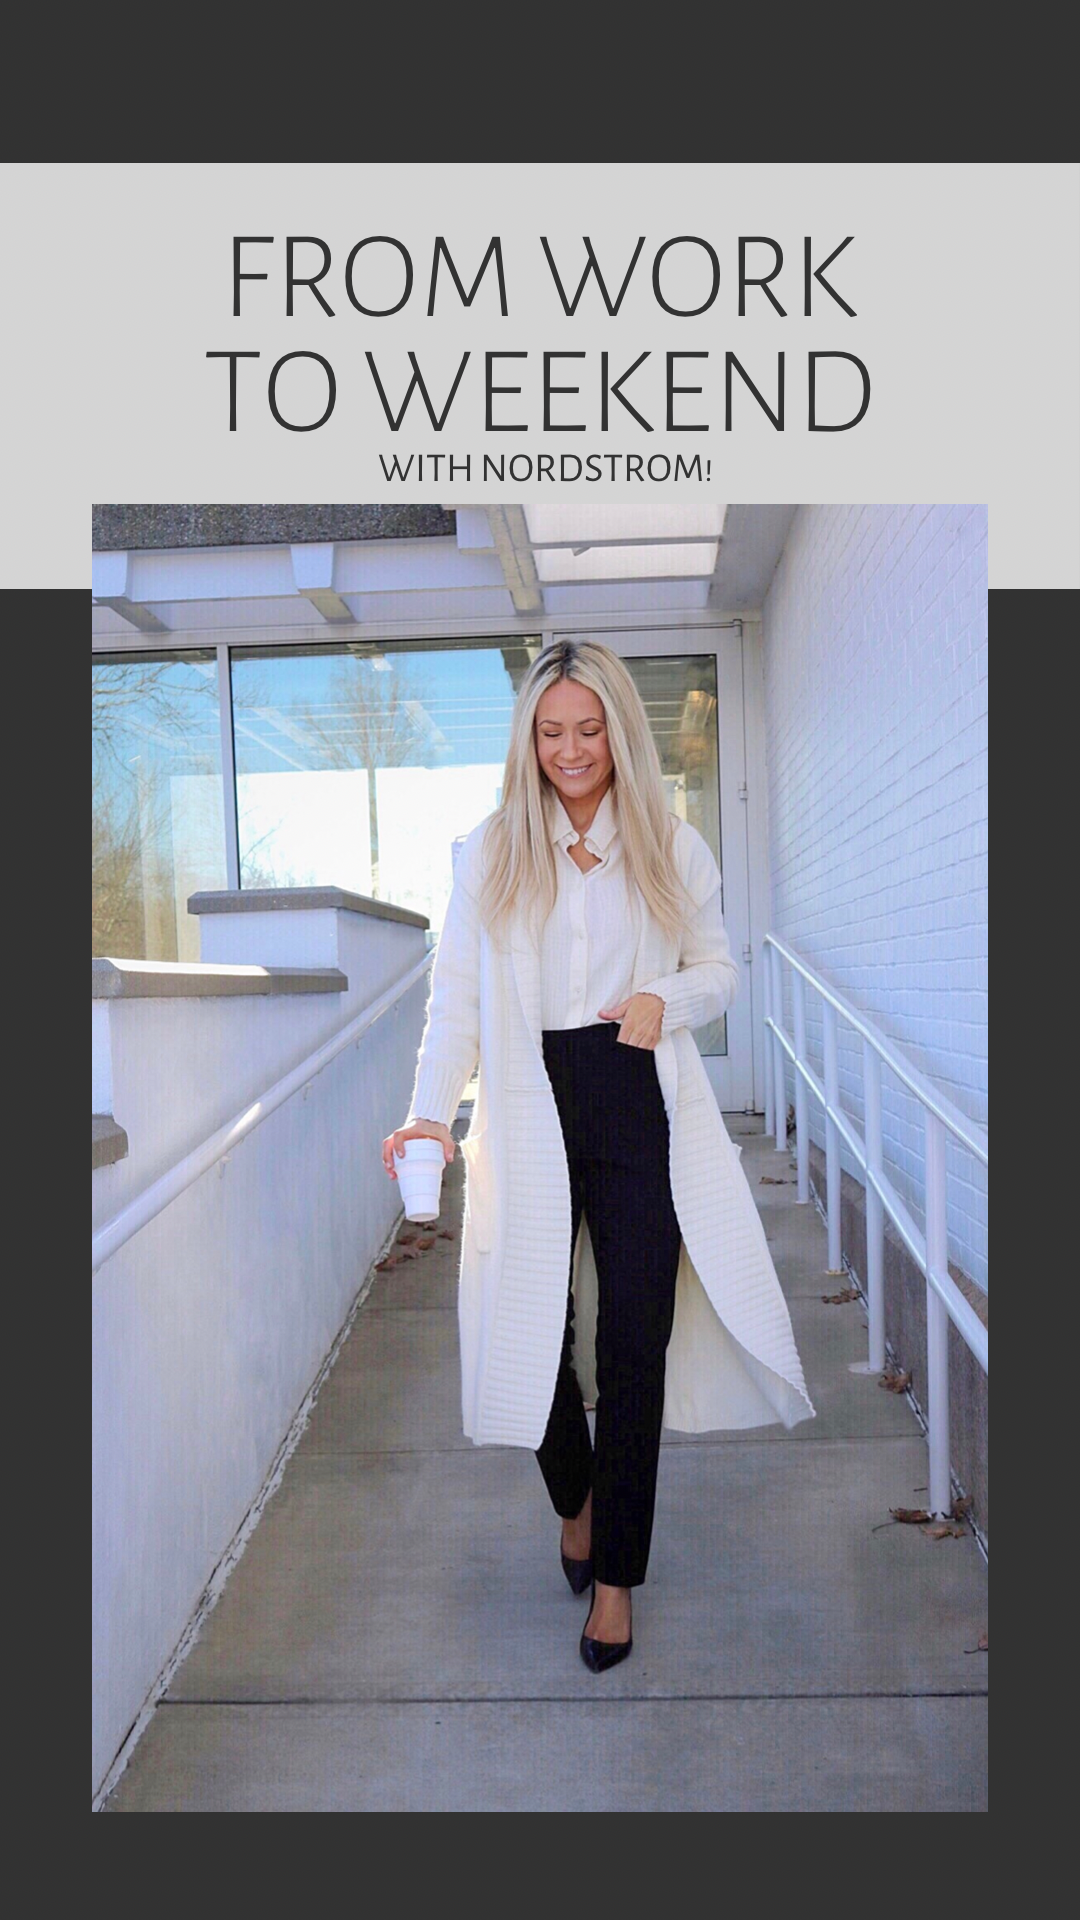 From Work to Weekend with Nordstrom!